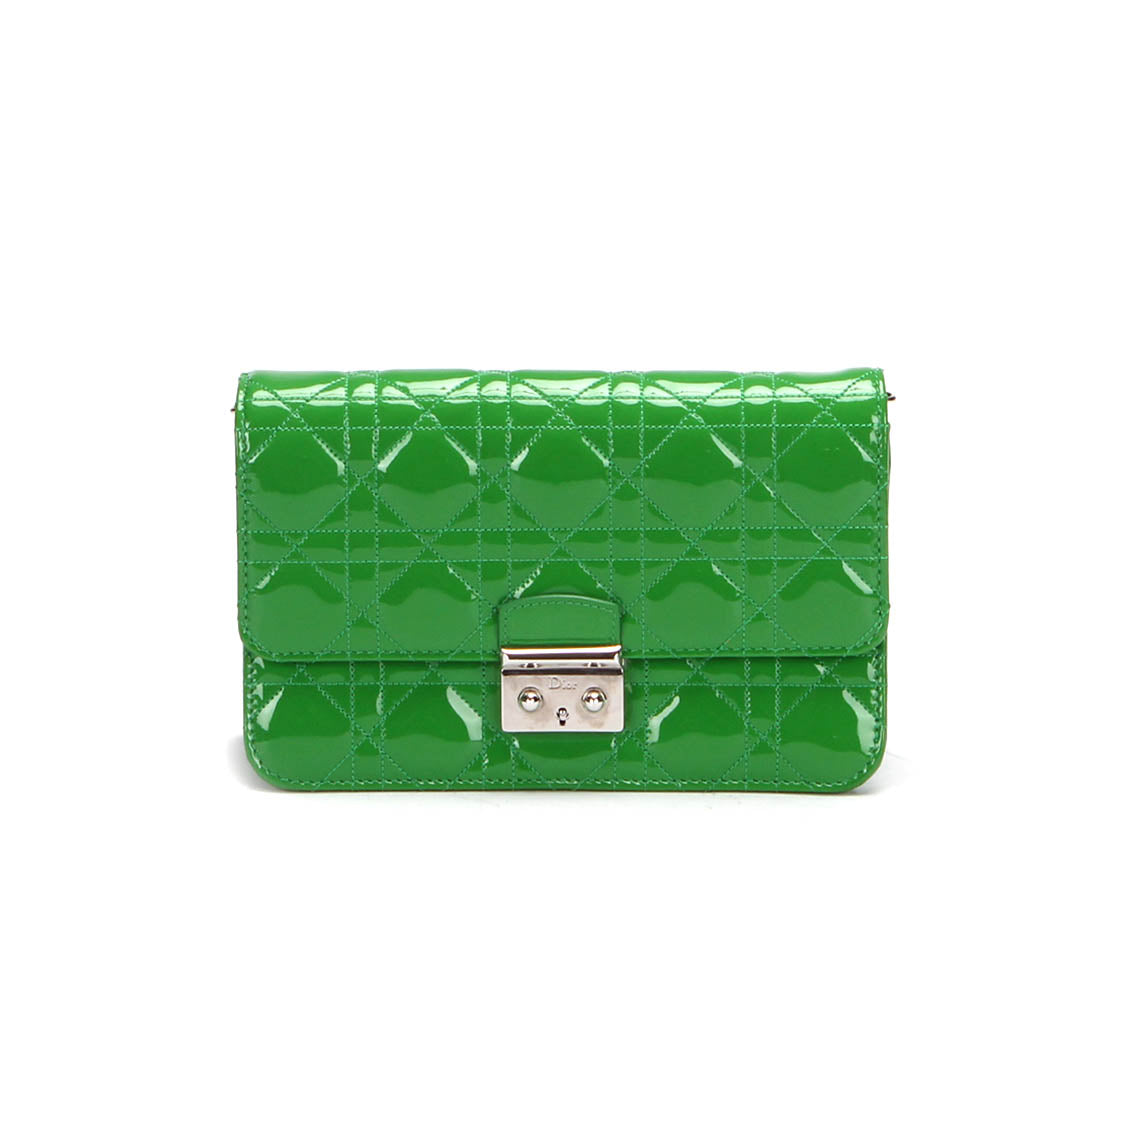 Cannage Miss Dior Patent Leather Crossbody Bag